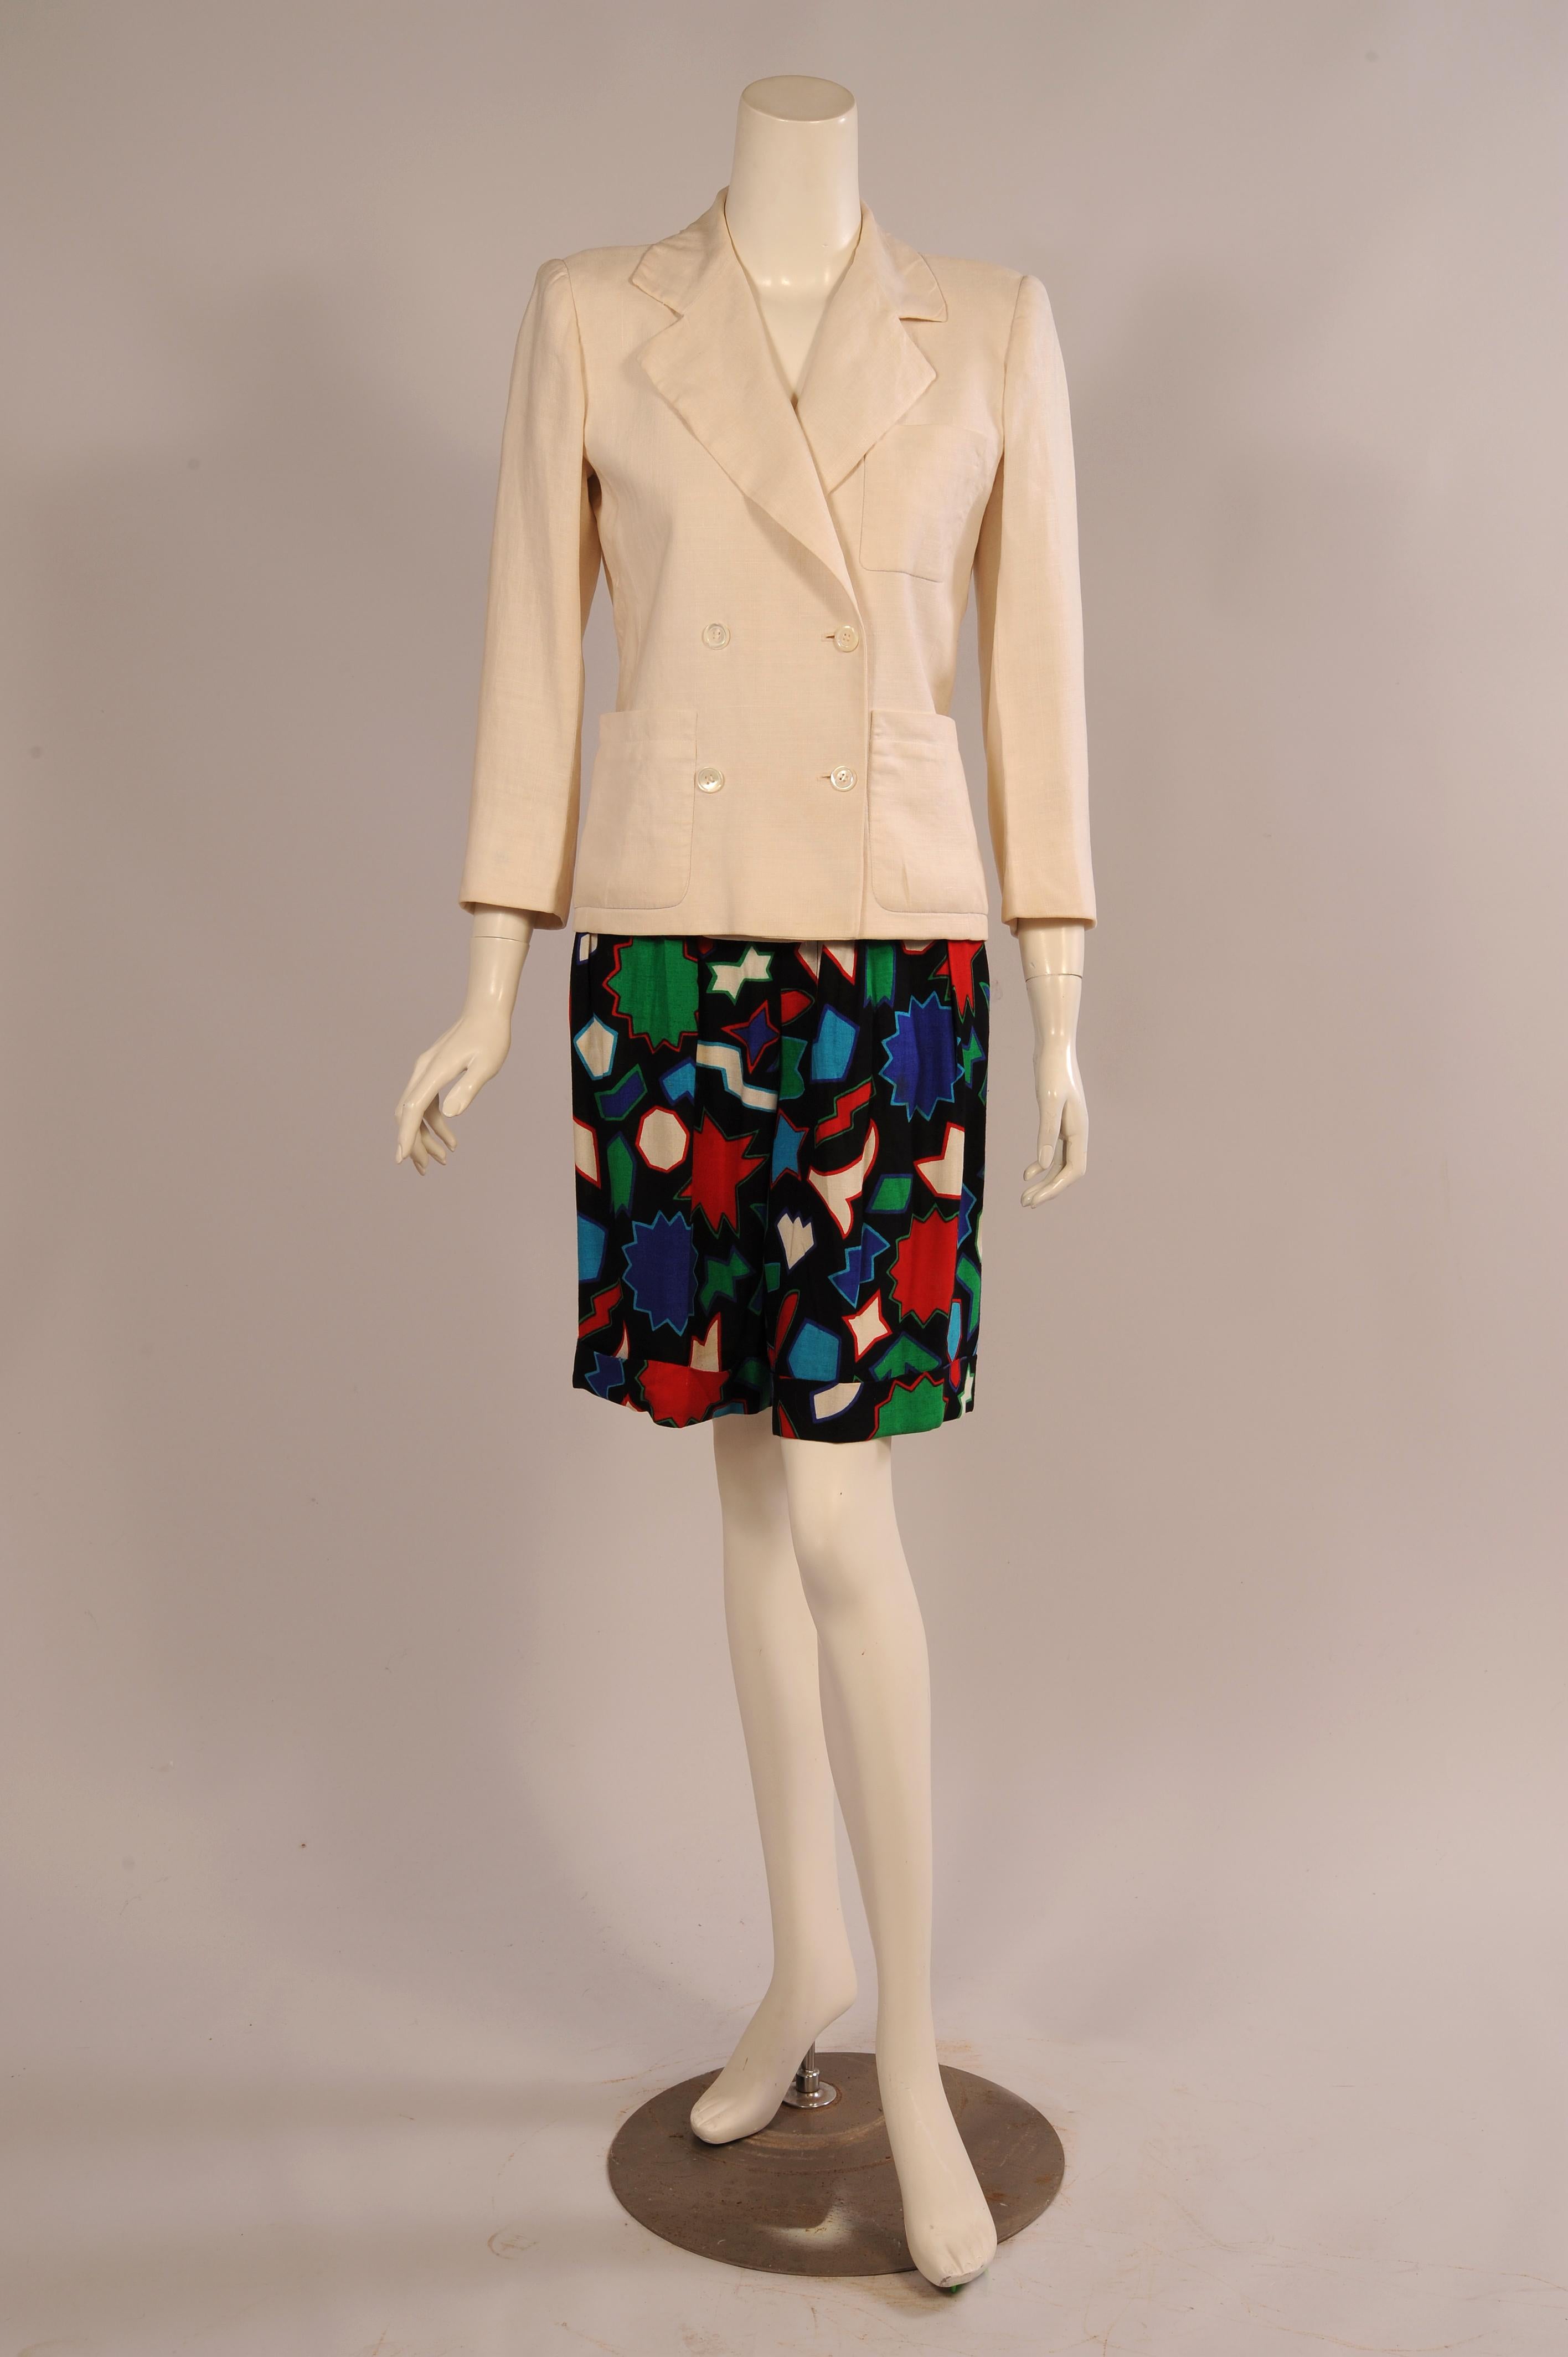 A classic creamy white double breasted linen blazer is paired with black linen shorts with brightly colored designs for a very chic summer suit. The jacket has a breast pocket and two hip pockets and it is fully lined. The shorts have a natural